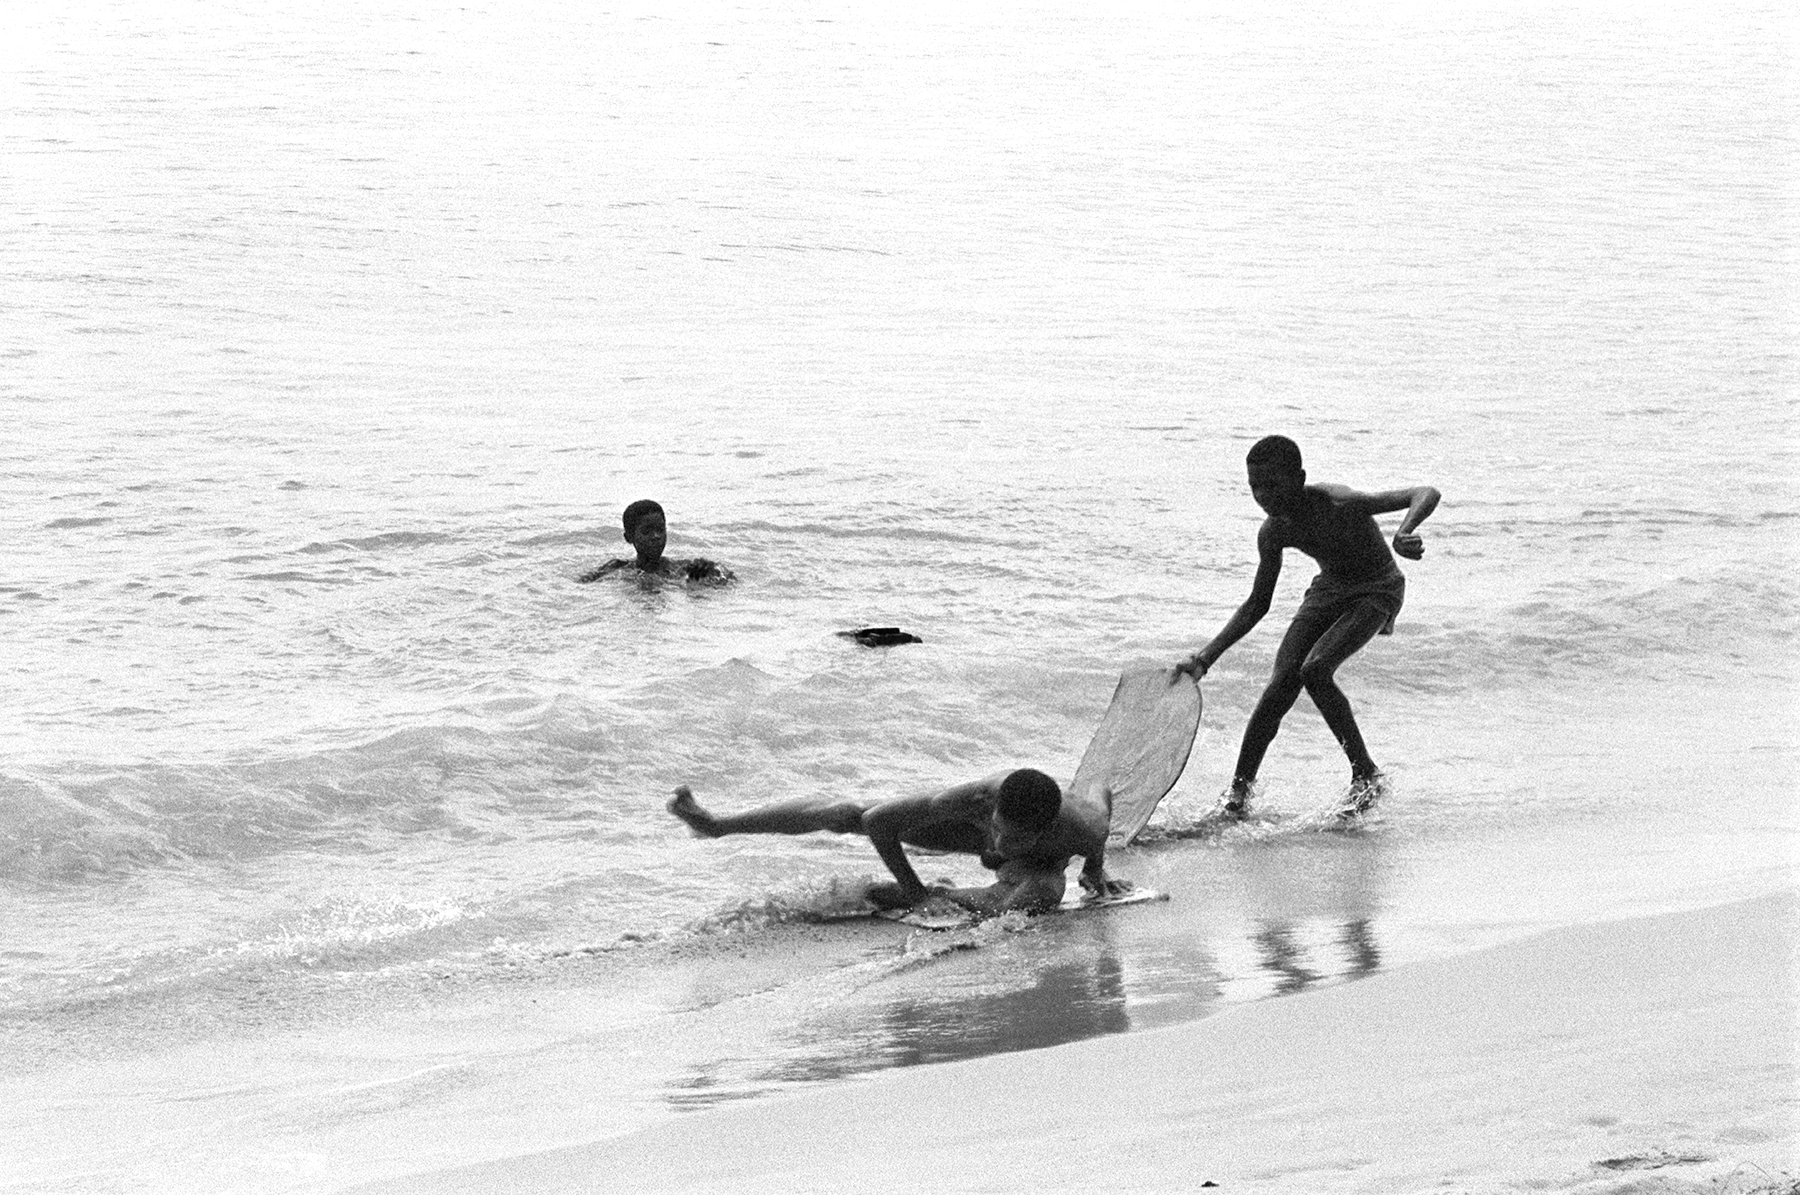 Photos by Francesca Phillips of boys playing on the beach in Barbados